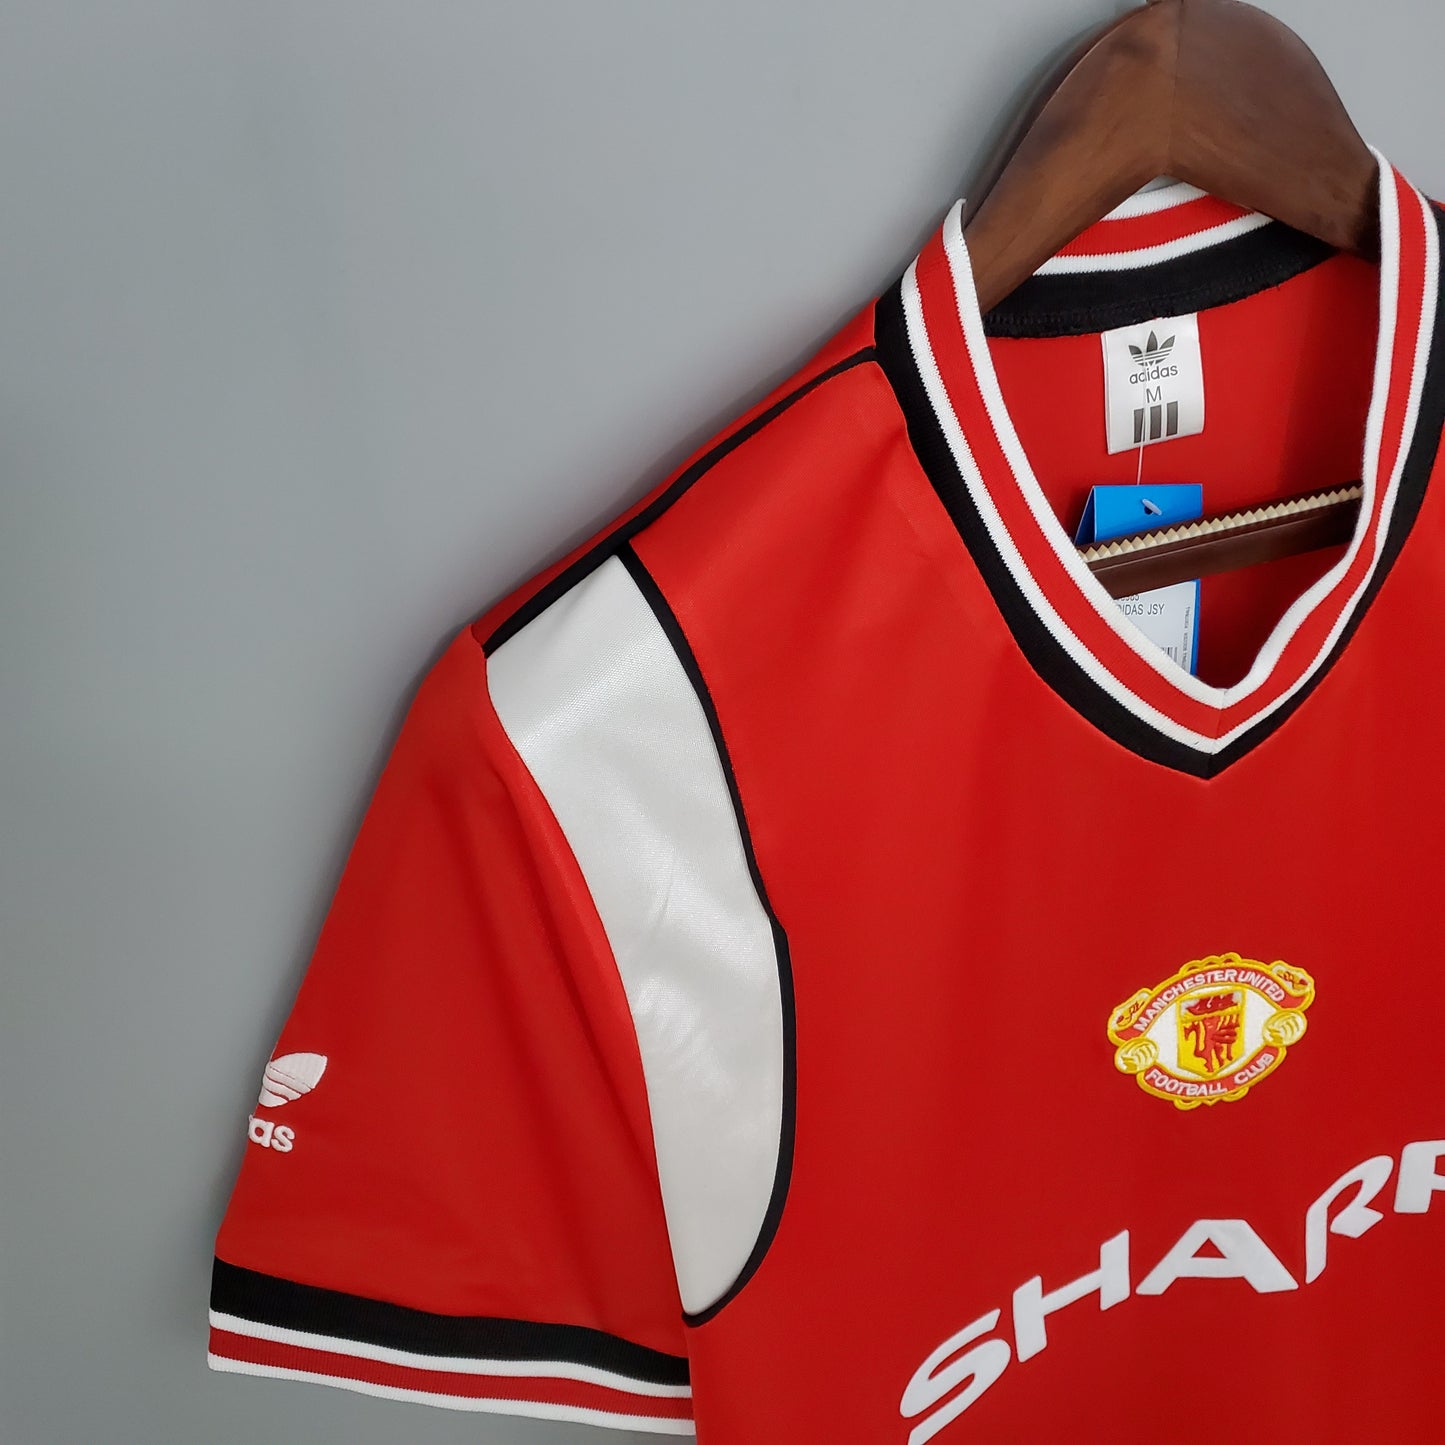 Manchester United 1984 - 1986 home shirt jersey Adidas Official Replica  size M